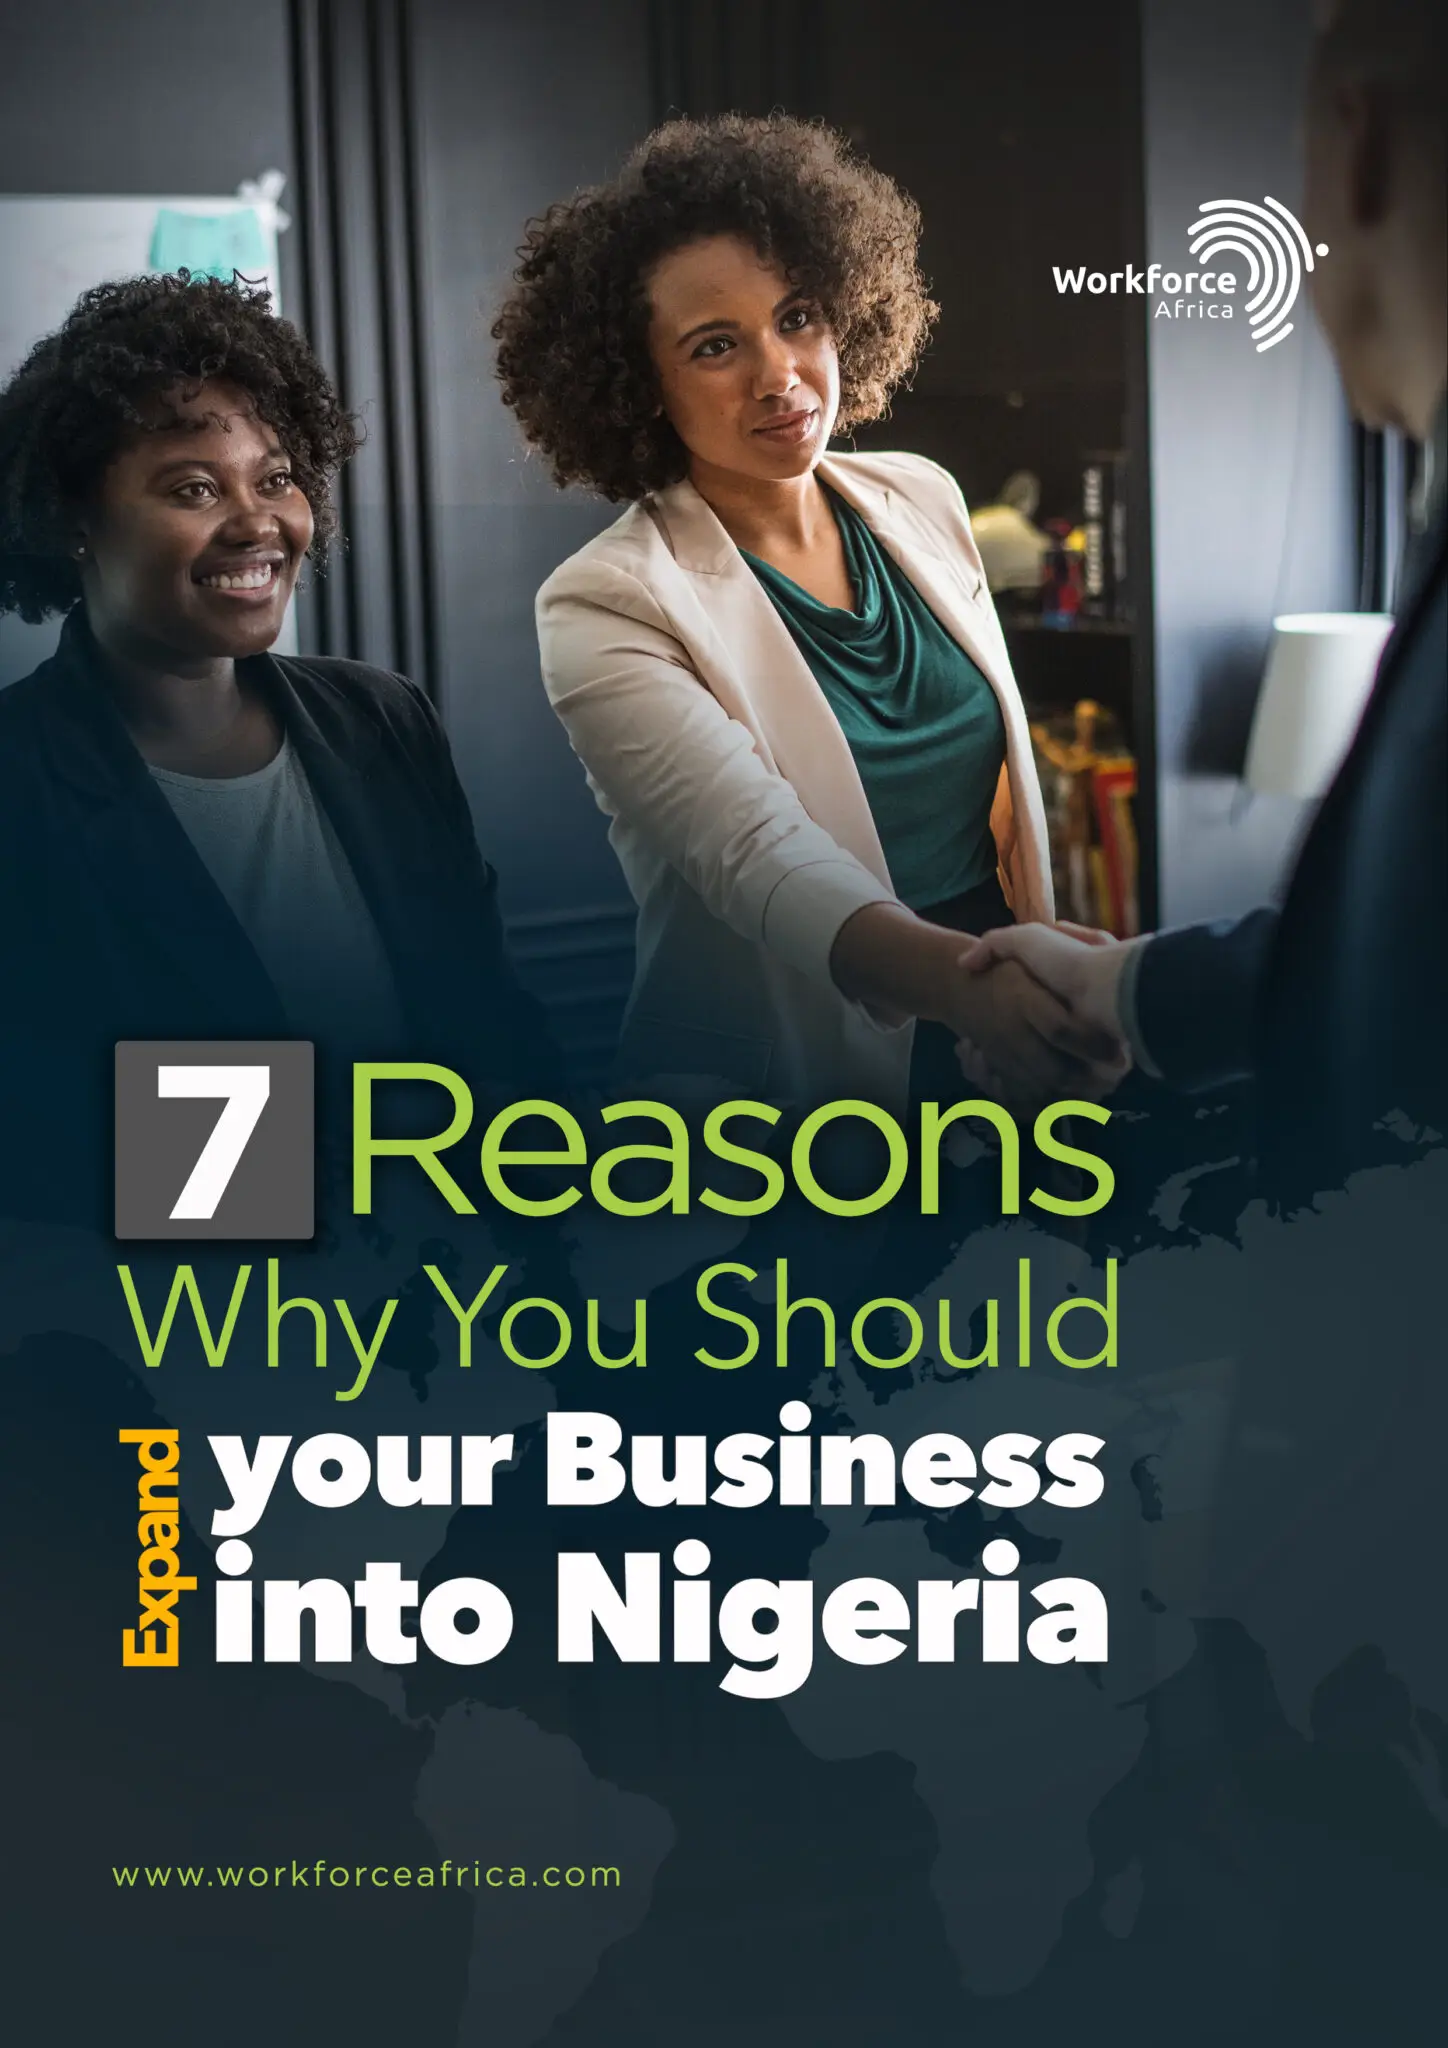 7 Reasons Why You Should Expand Your Business Into Nigeria cover image